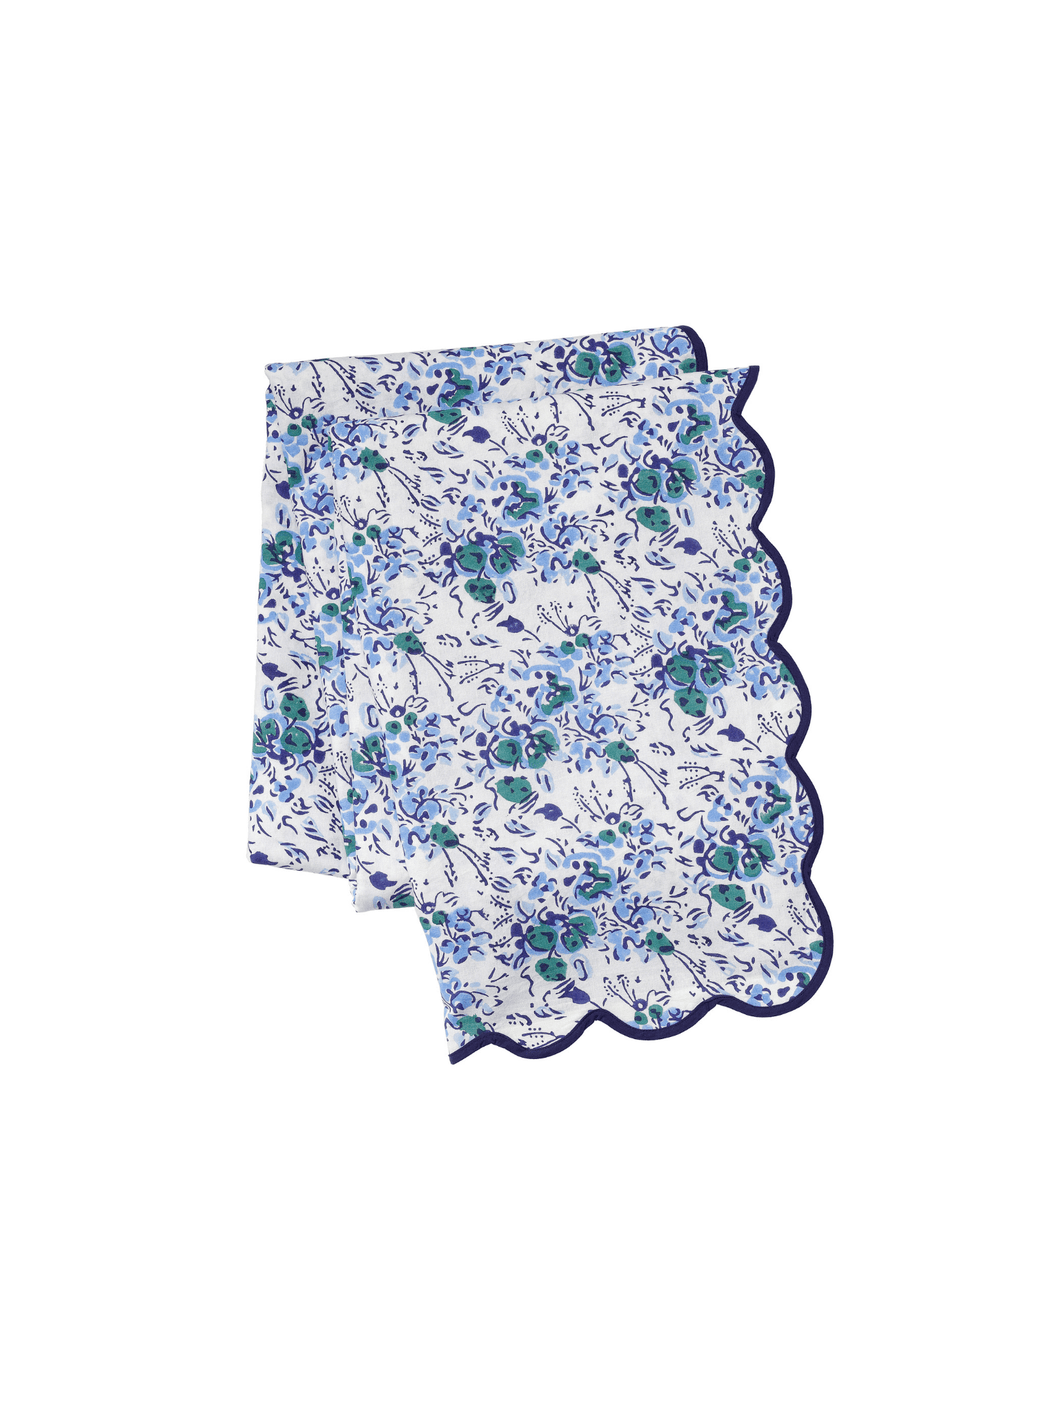 Blue Floral Scalloped Tablecloth